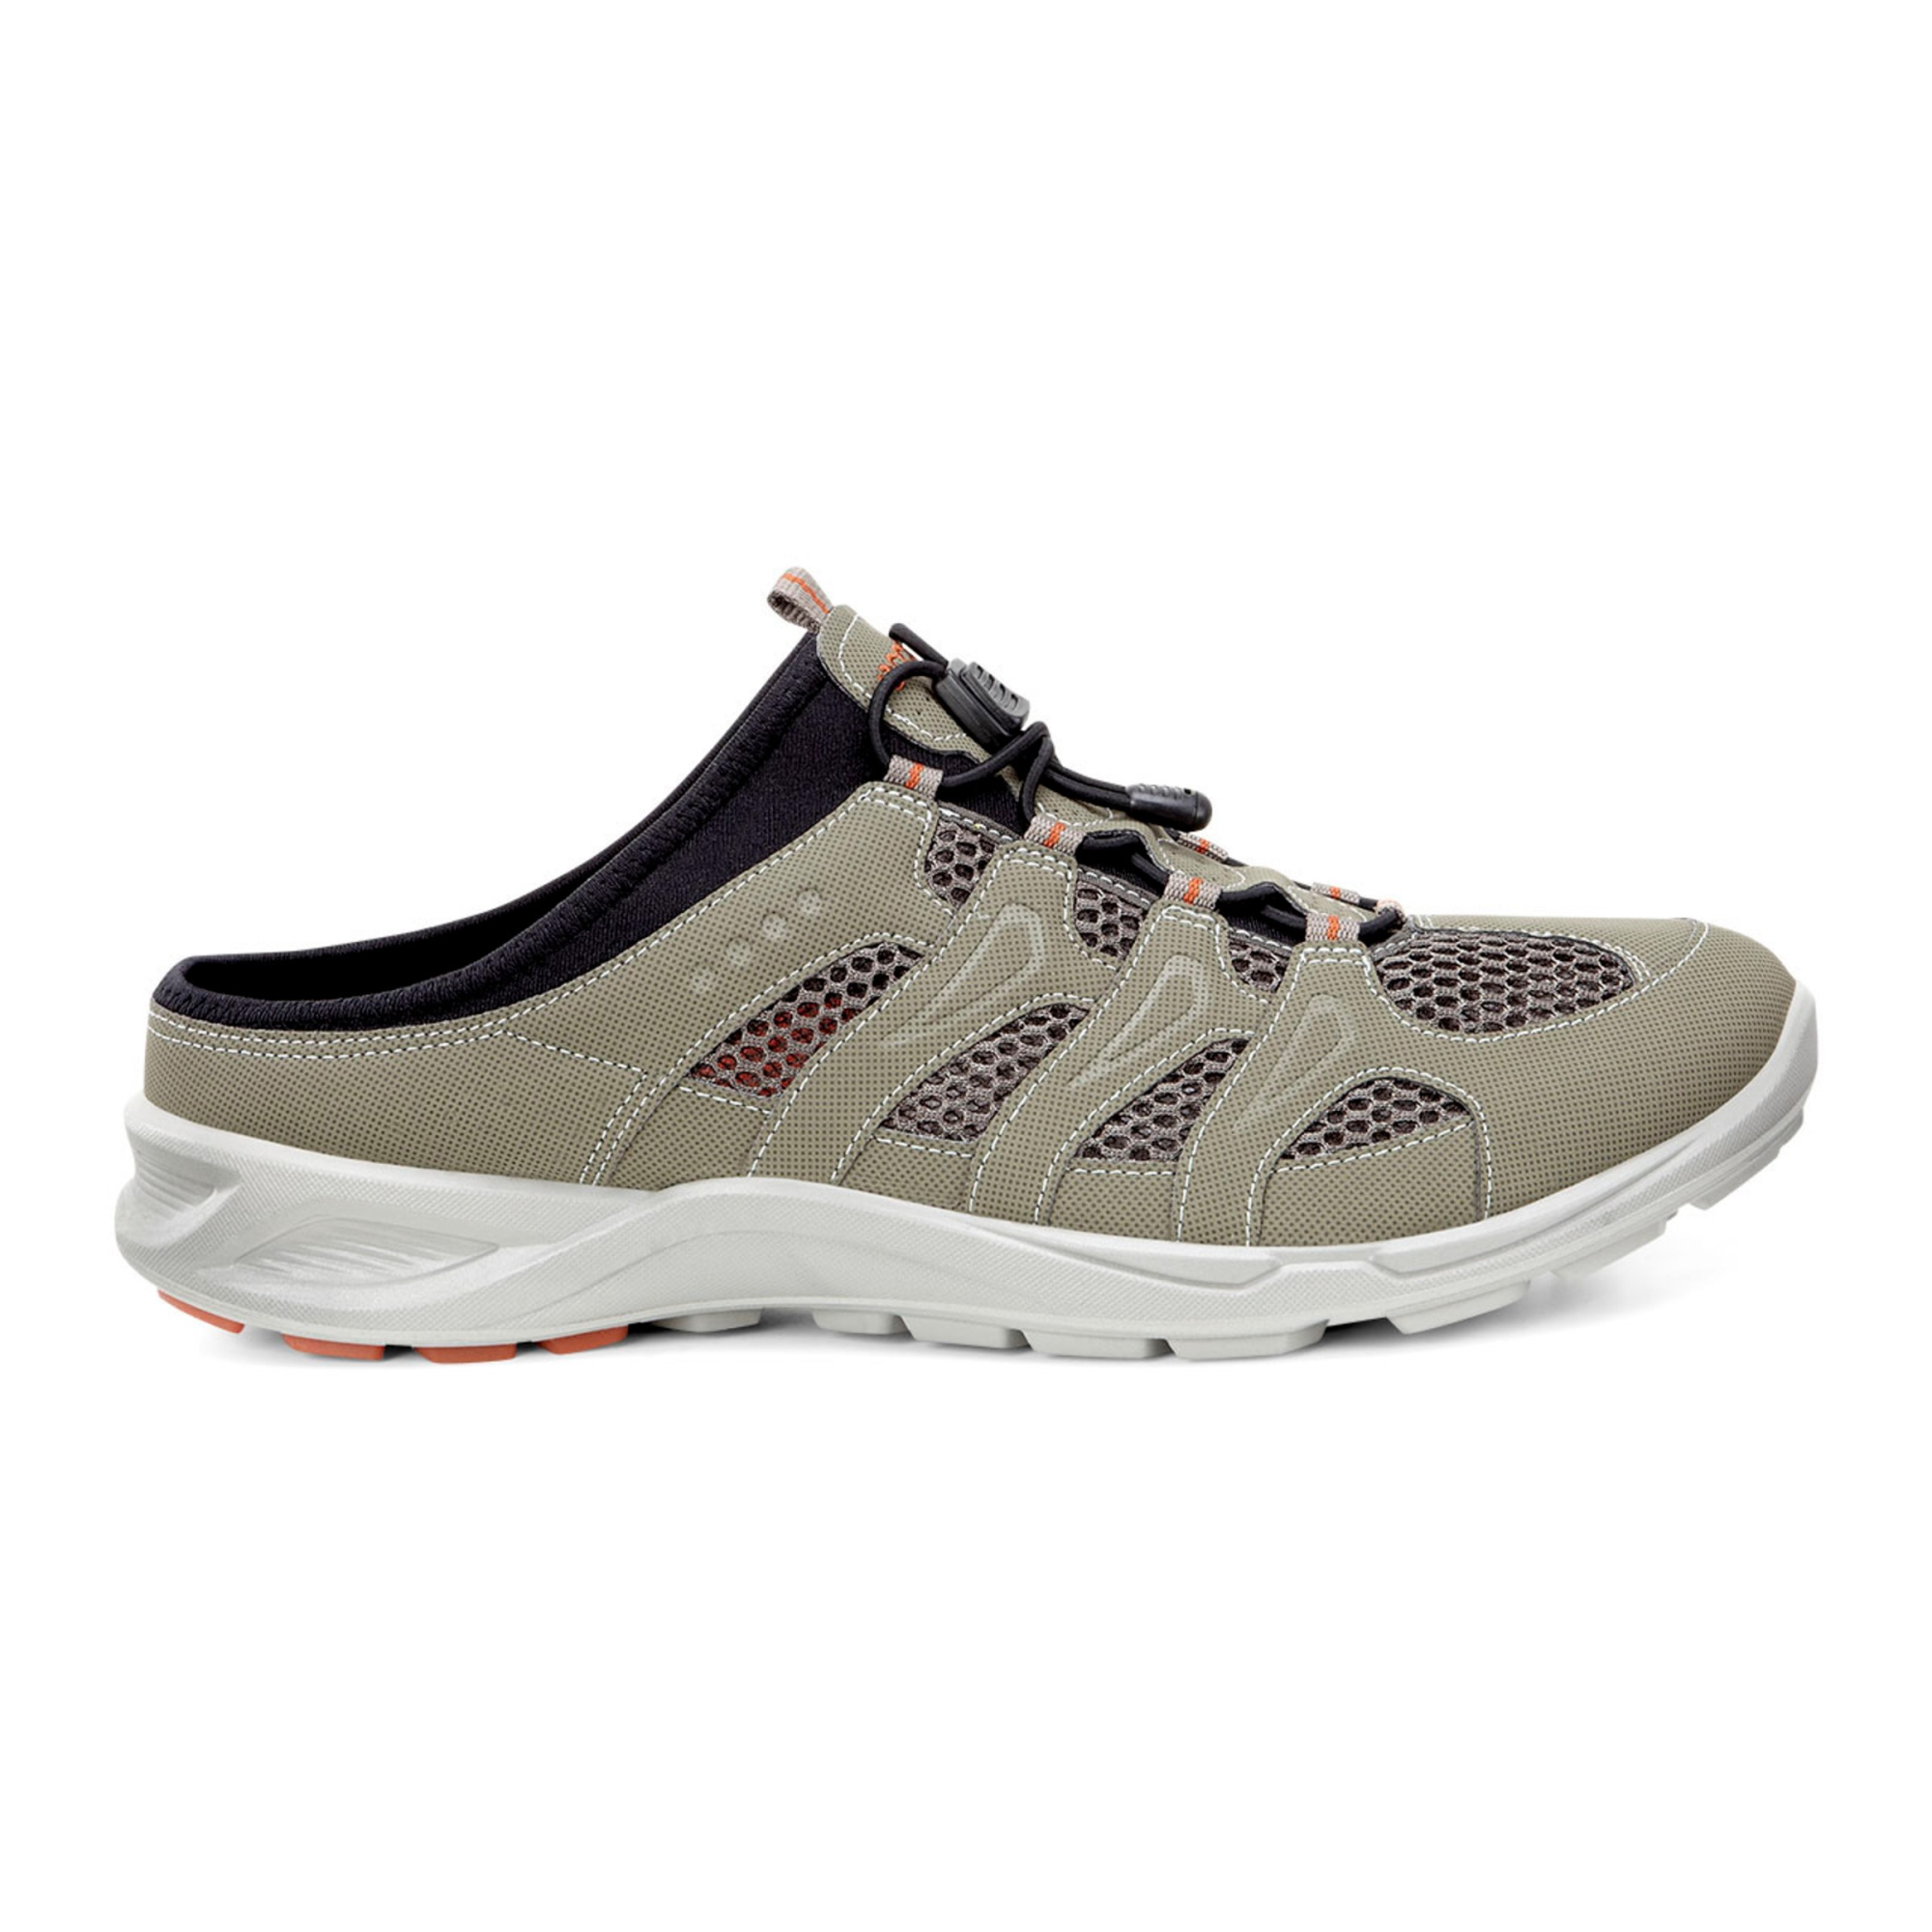 Ecco Mens Terracruise Slide 45 Products - Veryk - Veryk Mall, product, quick response, safe your money!